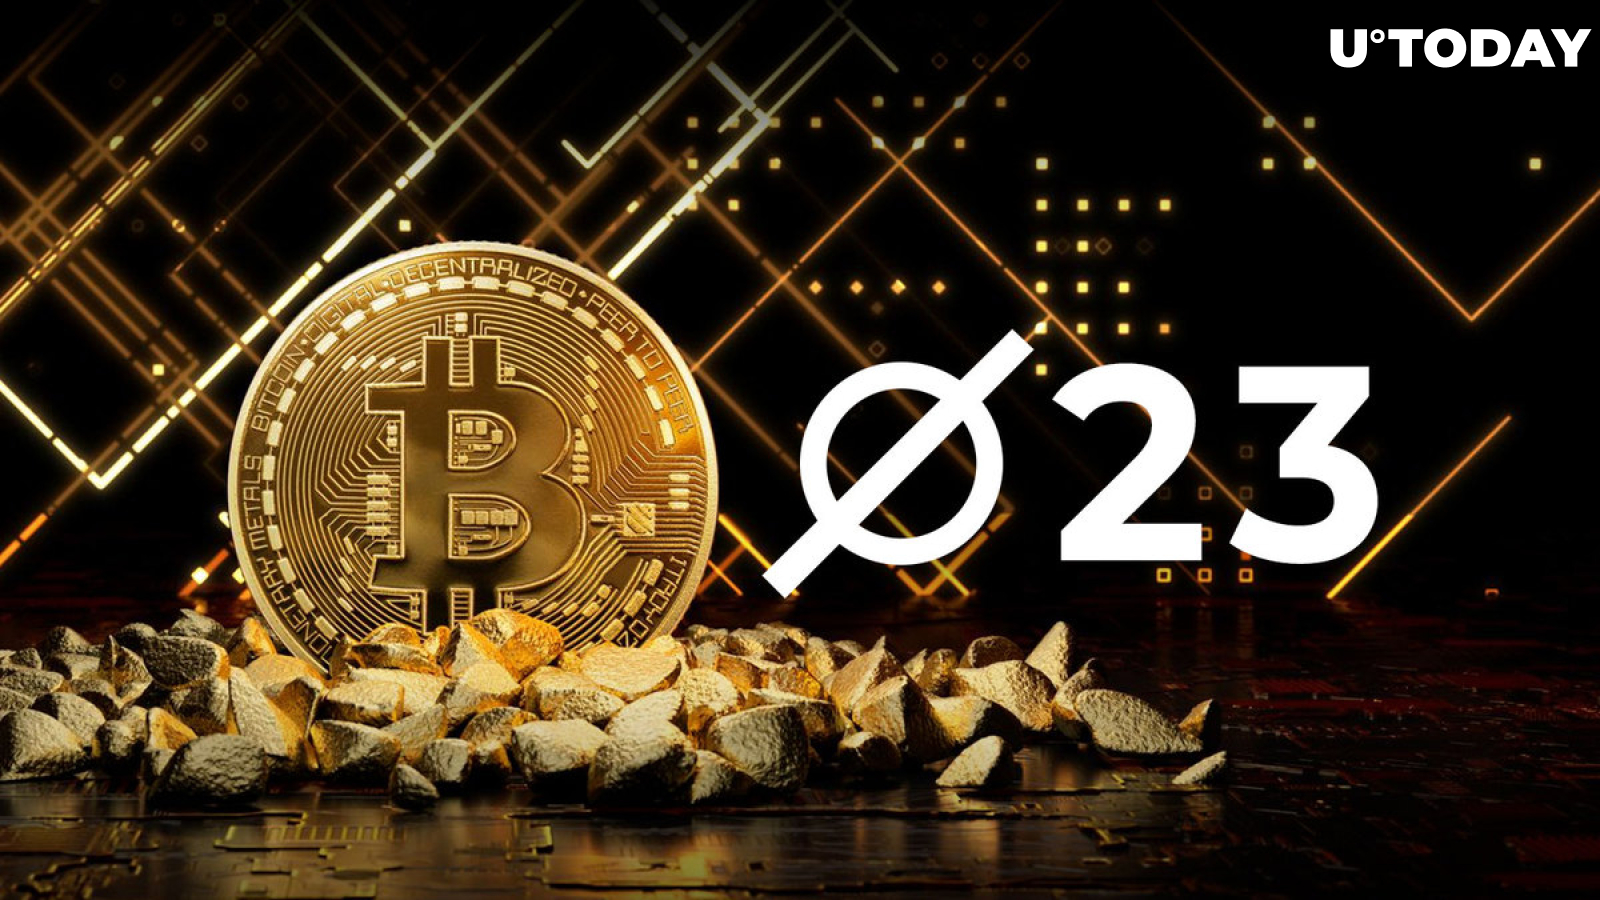 Bitcoin (BTC) Staking Concept Proposed by Babylon at Cosmoverse 2023